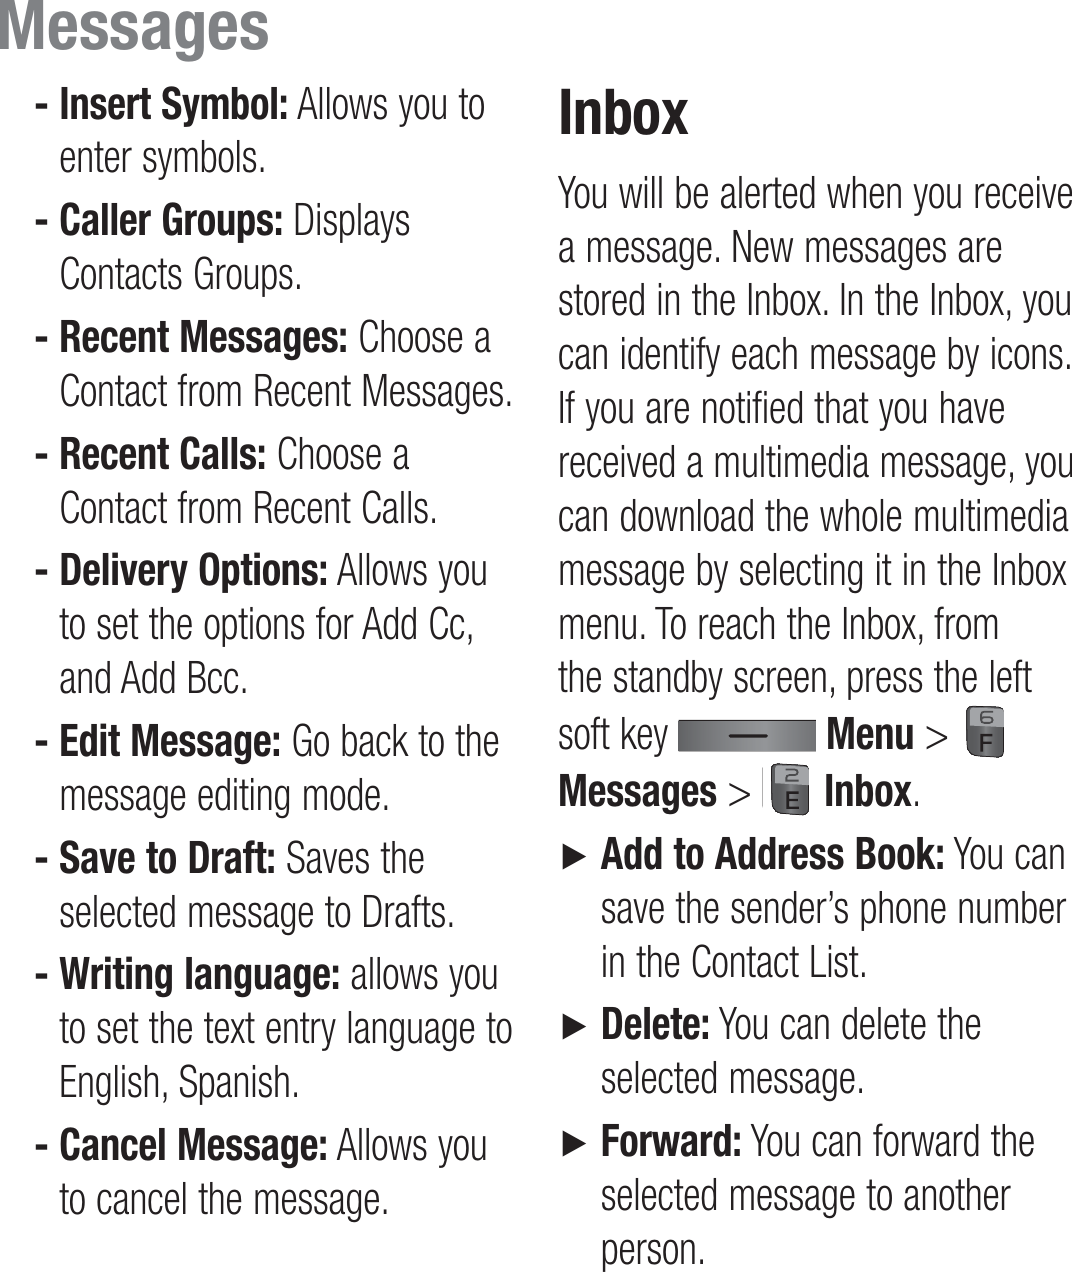  -  Insert Symbol: Allows you to enter symbols. -  Caller Groups: Displays Contacts Groups. -  Recent Messages: Choose a Contact from Recent Messages. -  Recent Calls: Choose a Contact from Recent Calls. -  Delivery Options: Allows you to set the options for Add Cc, and Add Bcc. -  Edit Message: Go back to the message editing mode. -  Save to Draft: Saves the selected message to Drafts. -  Writing language: allows you to set the text entry language to English, Spanish. -  Cancel Message: Allows you to cancel the message.InboxYou will be alerted when you receive a message. New messages are stored in the Inbox. In the Inbox, you can identify each message by icons. If you are notified that you have received a multimedia message, you can download the whole multimedia message by selecting it in the Inbox menu. To reach the Inbox, from the standby screen, press the left soft key   Menu &gt;   Messages &gt;   Inbox.►   Add to Address Book: You can save the sender’s phone number in the Contact List.►   Delete: You can delete the selected message.►   Forward: You can forward the selected message to another person.Messages